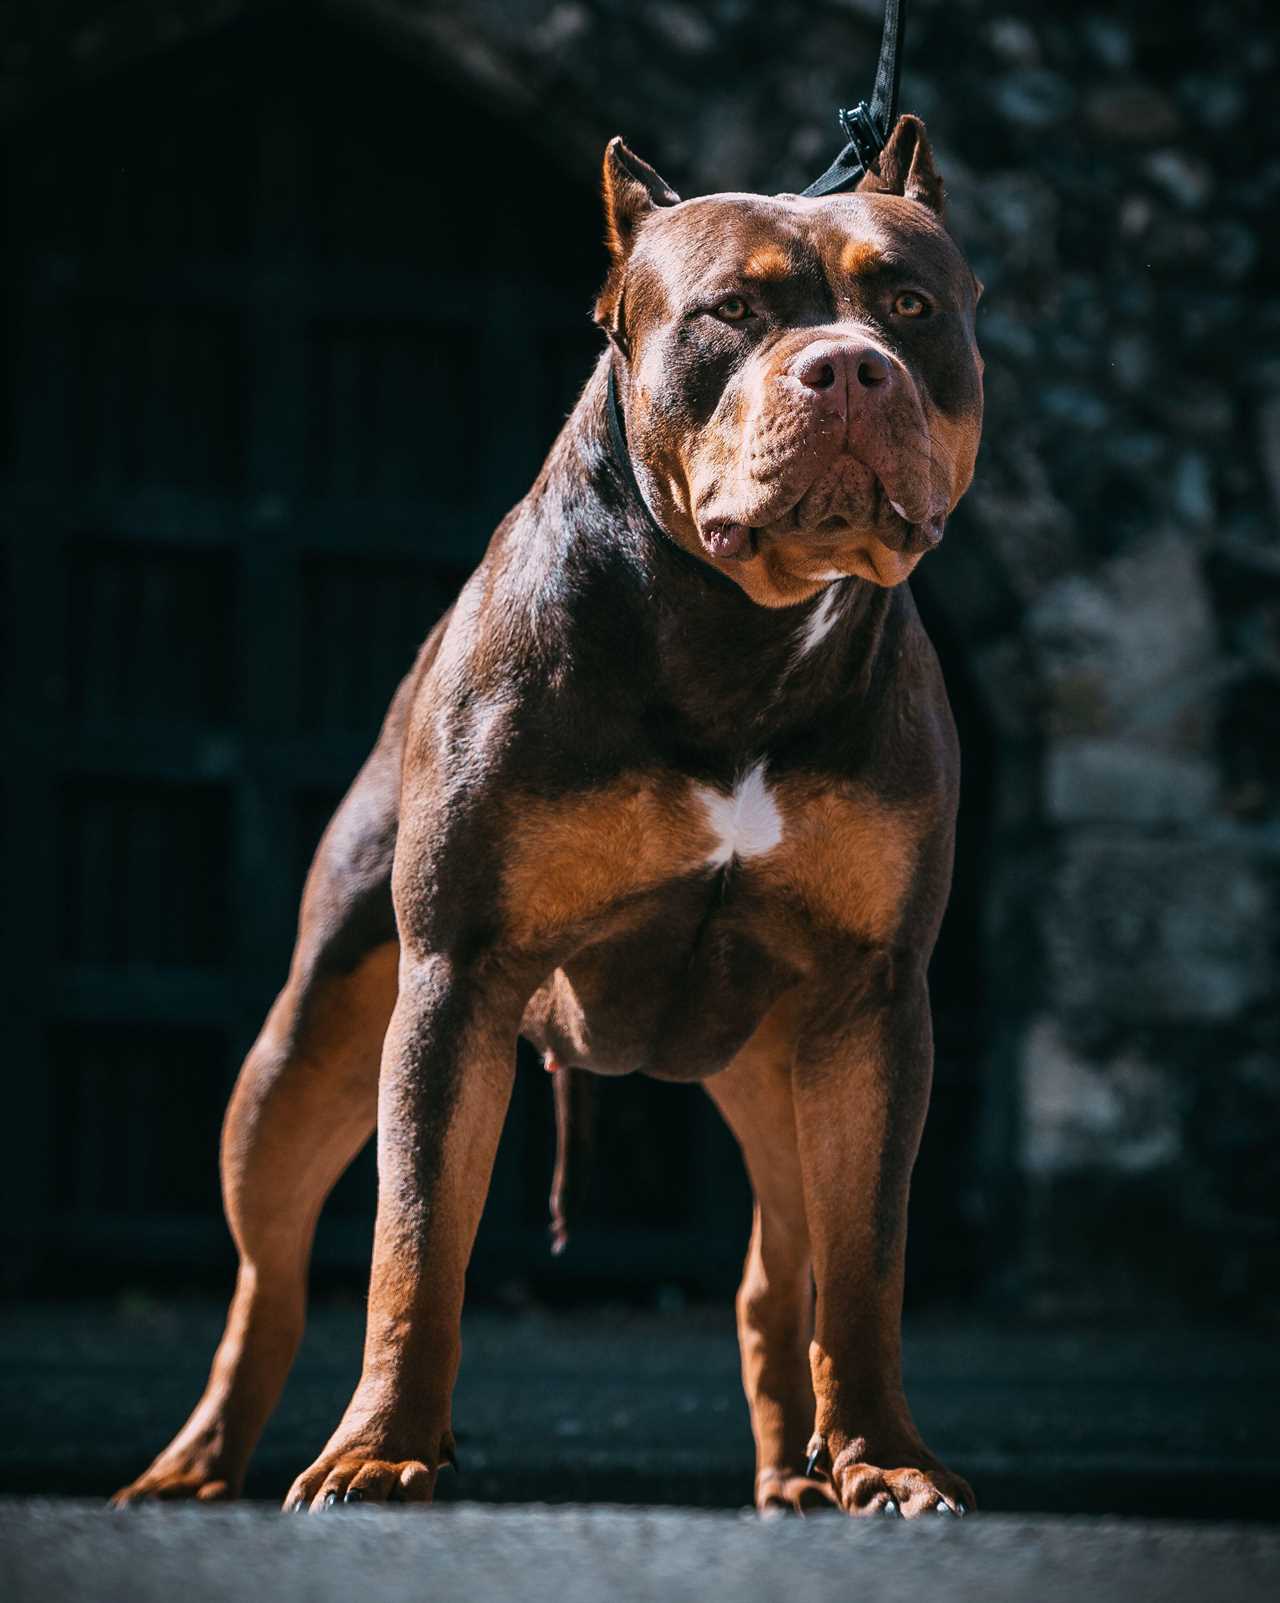 Aggressive XL Bully Dogs to Be Banned by End of Year to Prevent Violent Attacks, Rishi Sunak Announces